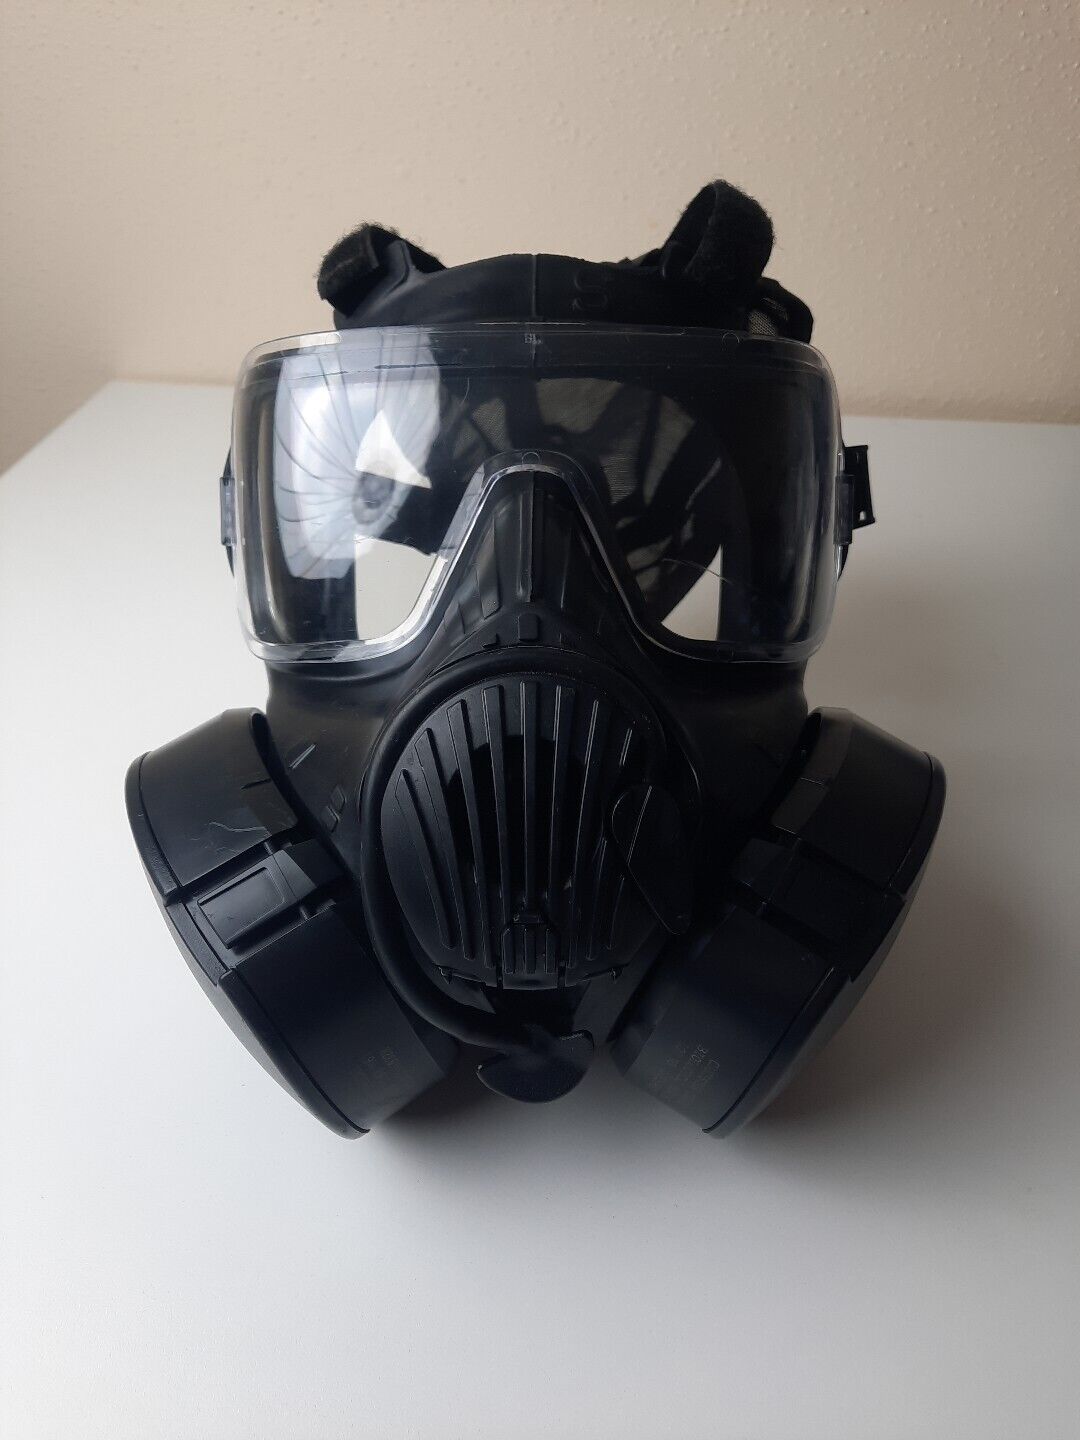 AVON M50 GAS CHEMICAL MASK SIZE SMALL W/ M61 CANISTERS- U.S. MILITARY / LAW ENF